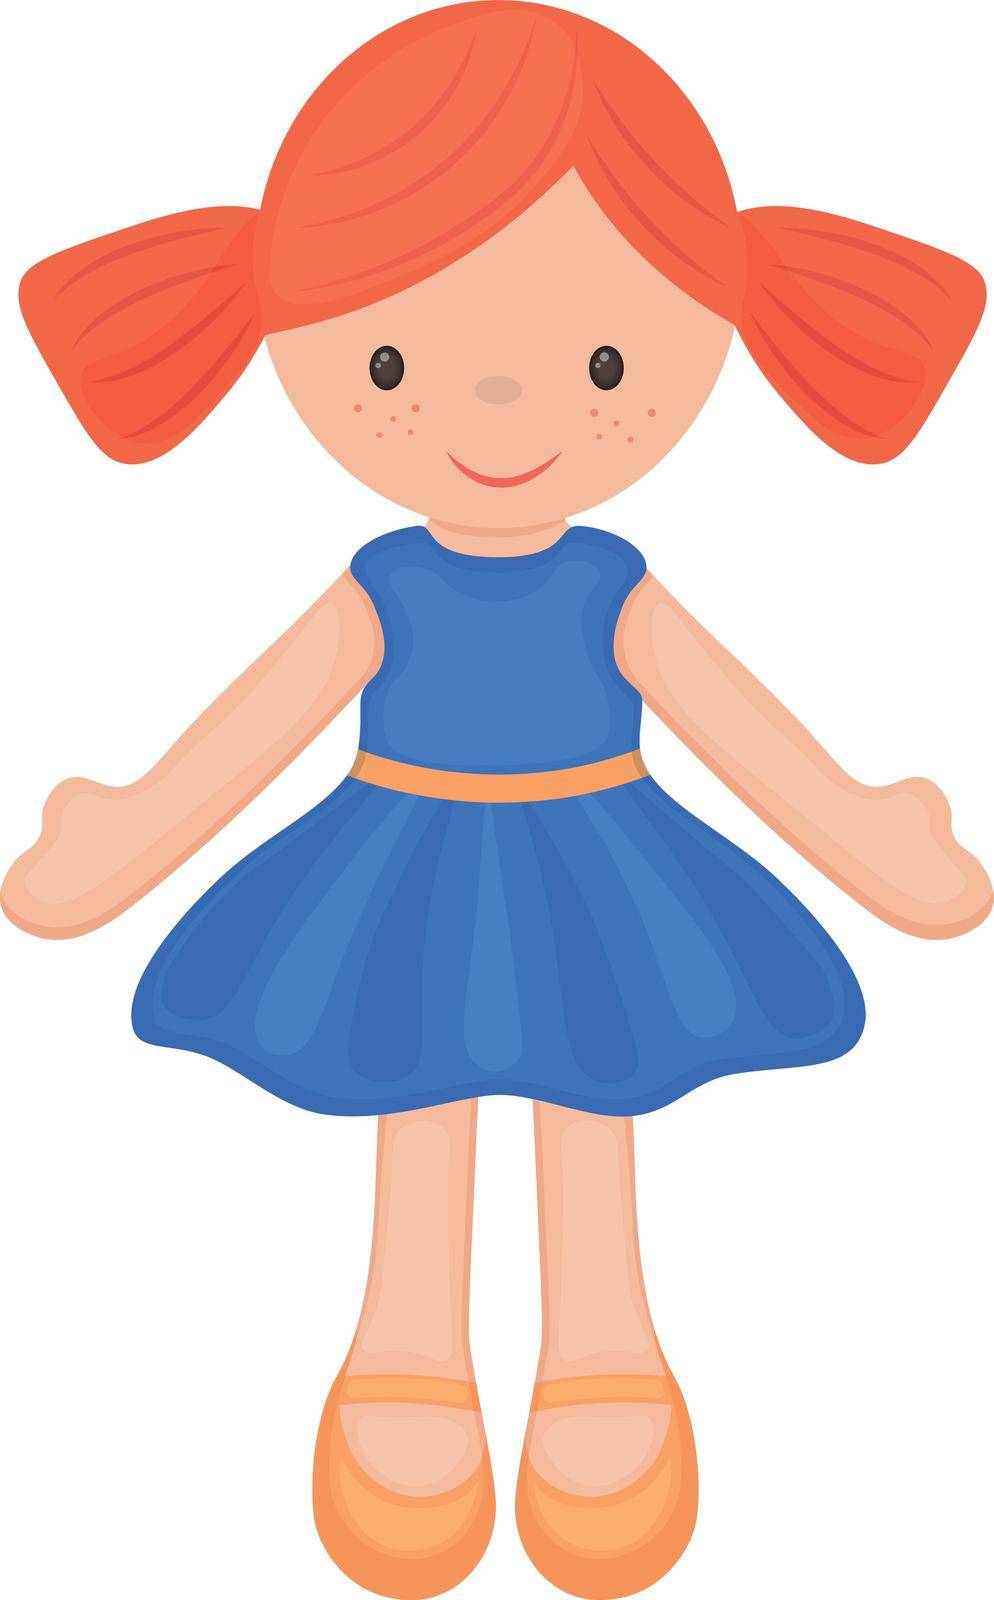 Doll. Cute children s toy with red hair. A doll in a beautiful dress. Vector illustration isolated on a white background.